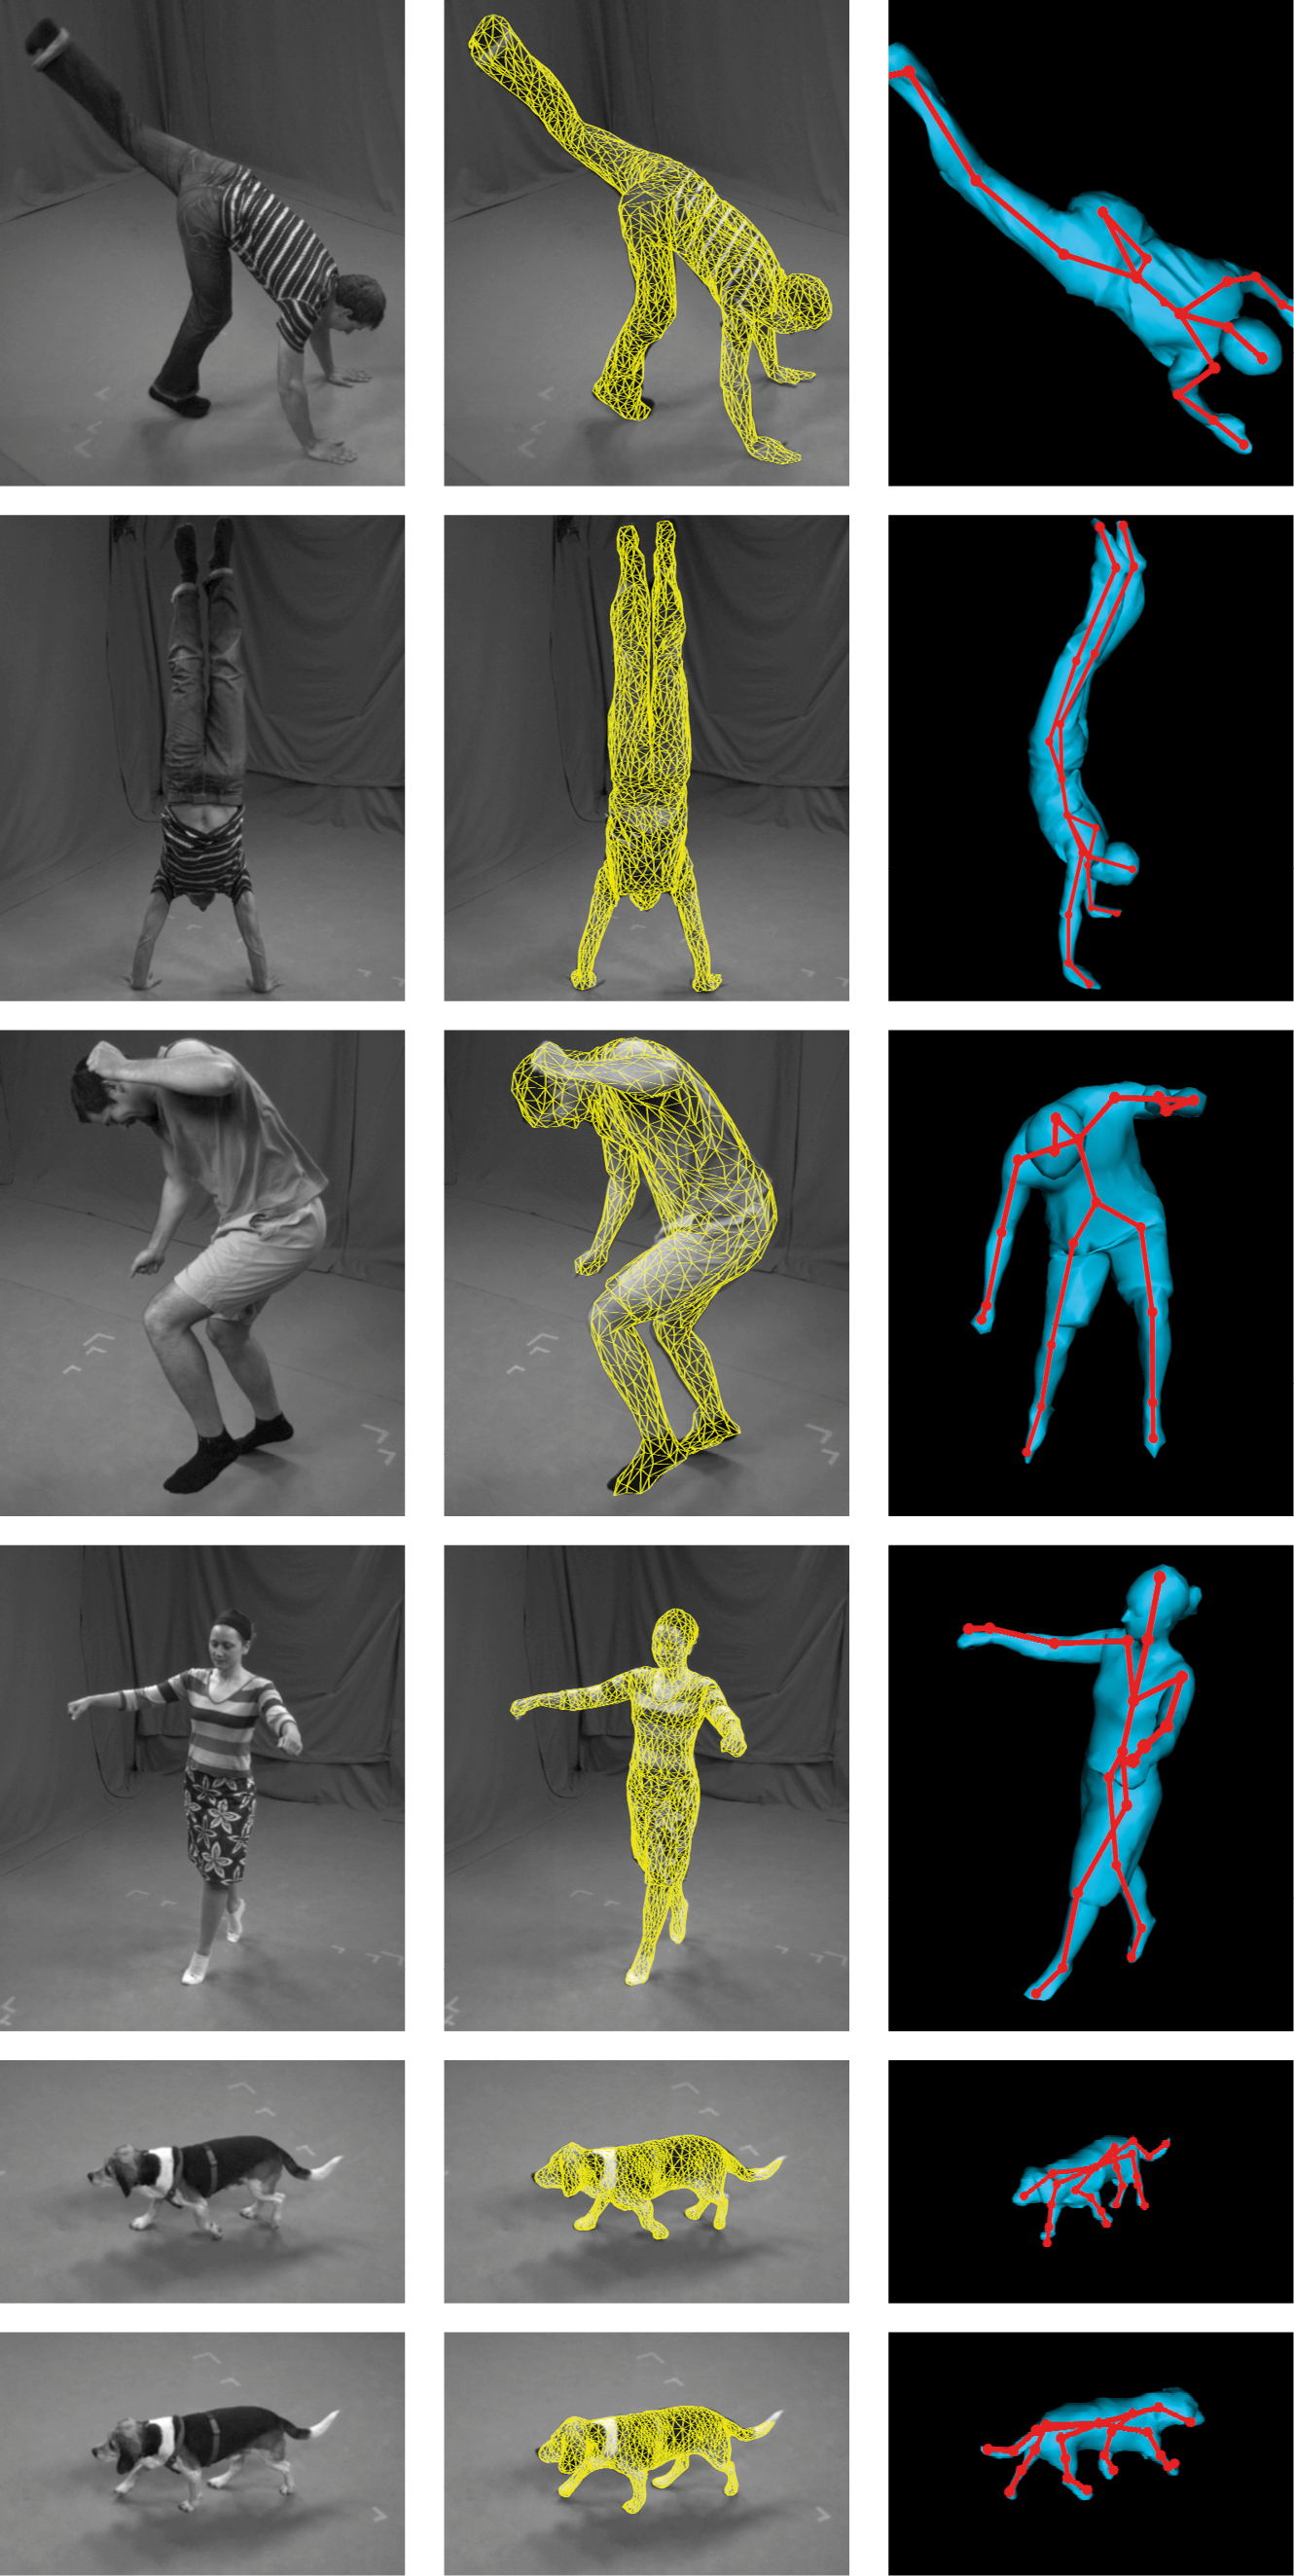 Motion Capture Using Joint Skeleton Tracking and Surface Estimation